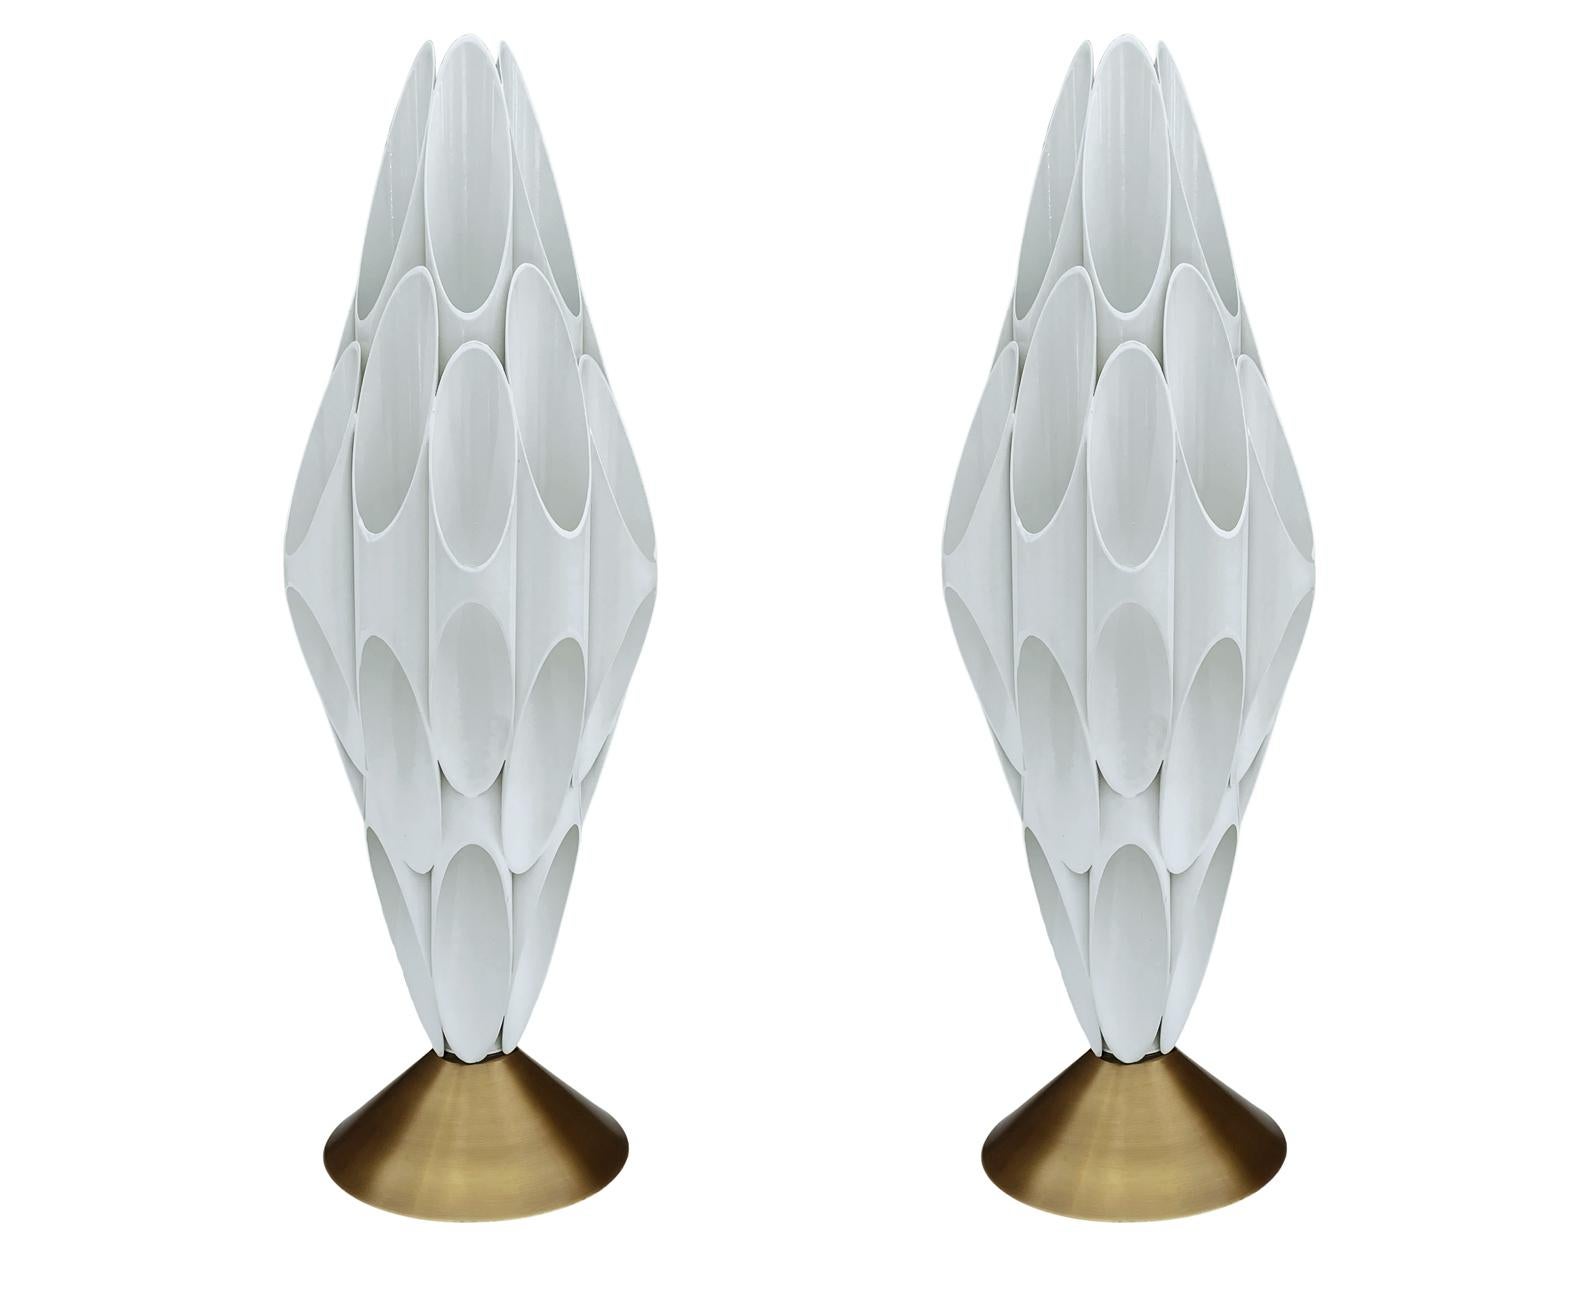 A pair of striking & chic tubular table lamps made by Designline. These feature heavy brass construction. Takes one standard bulb. Cord is very long with built in switch.